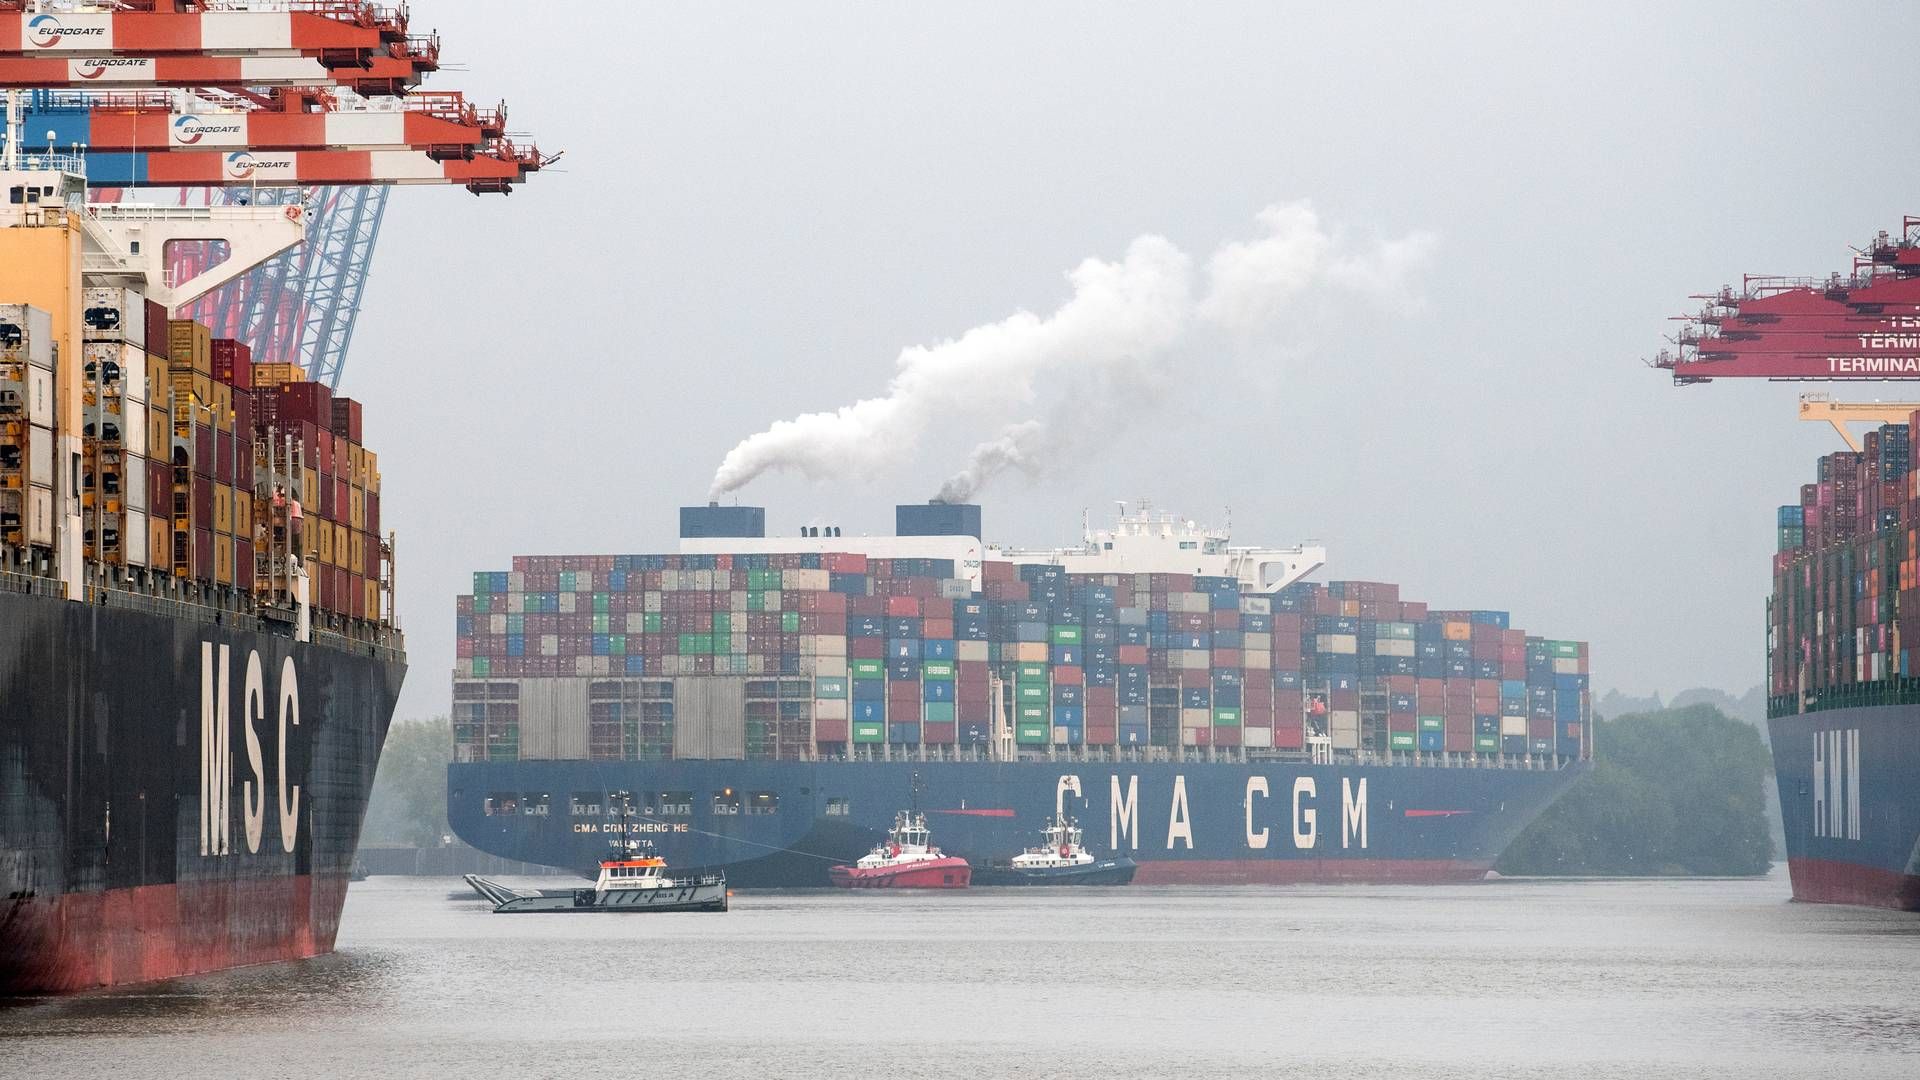 French carrier CMA CGM and South Korean HMM have both ordered ships that can sail on green methanol. | Photo: Daniel Bockwoldt/AP/Ritzau Scanpix